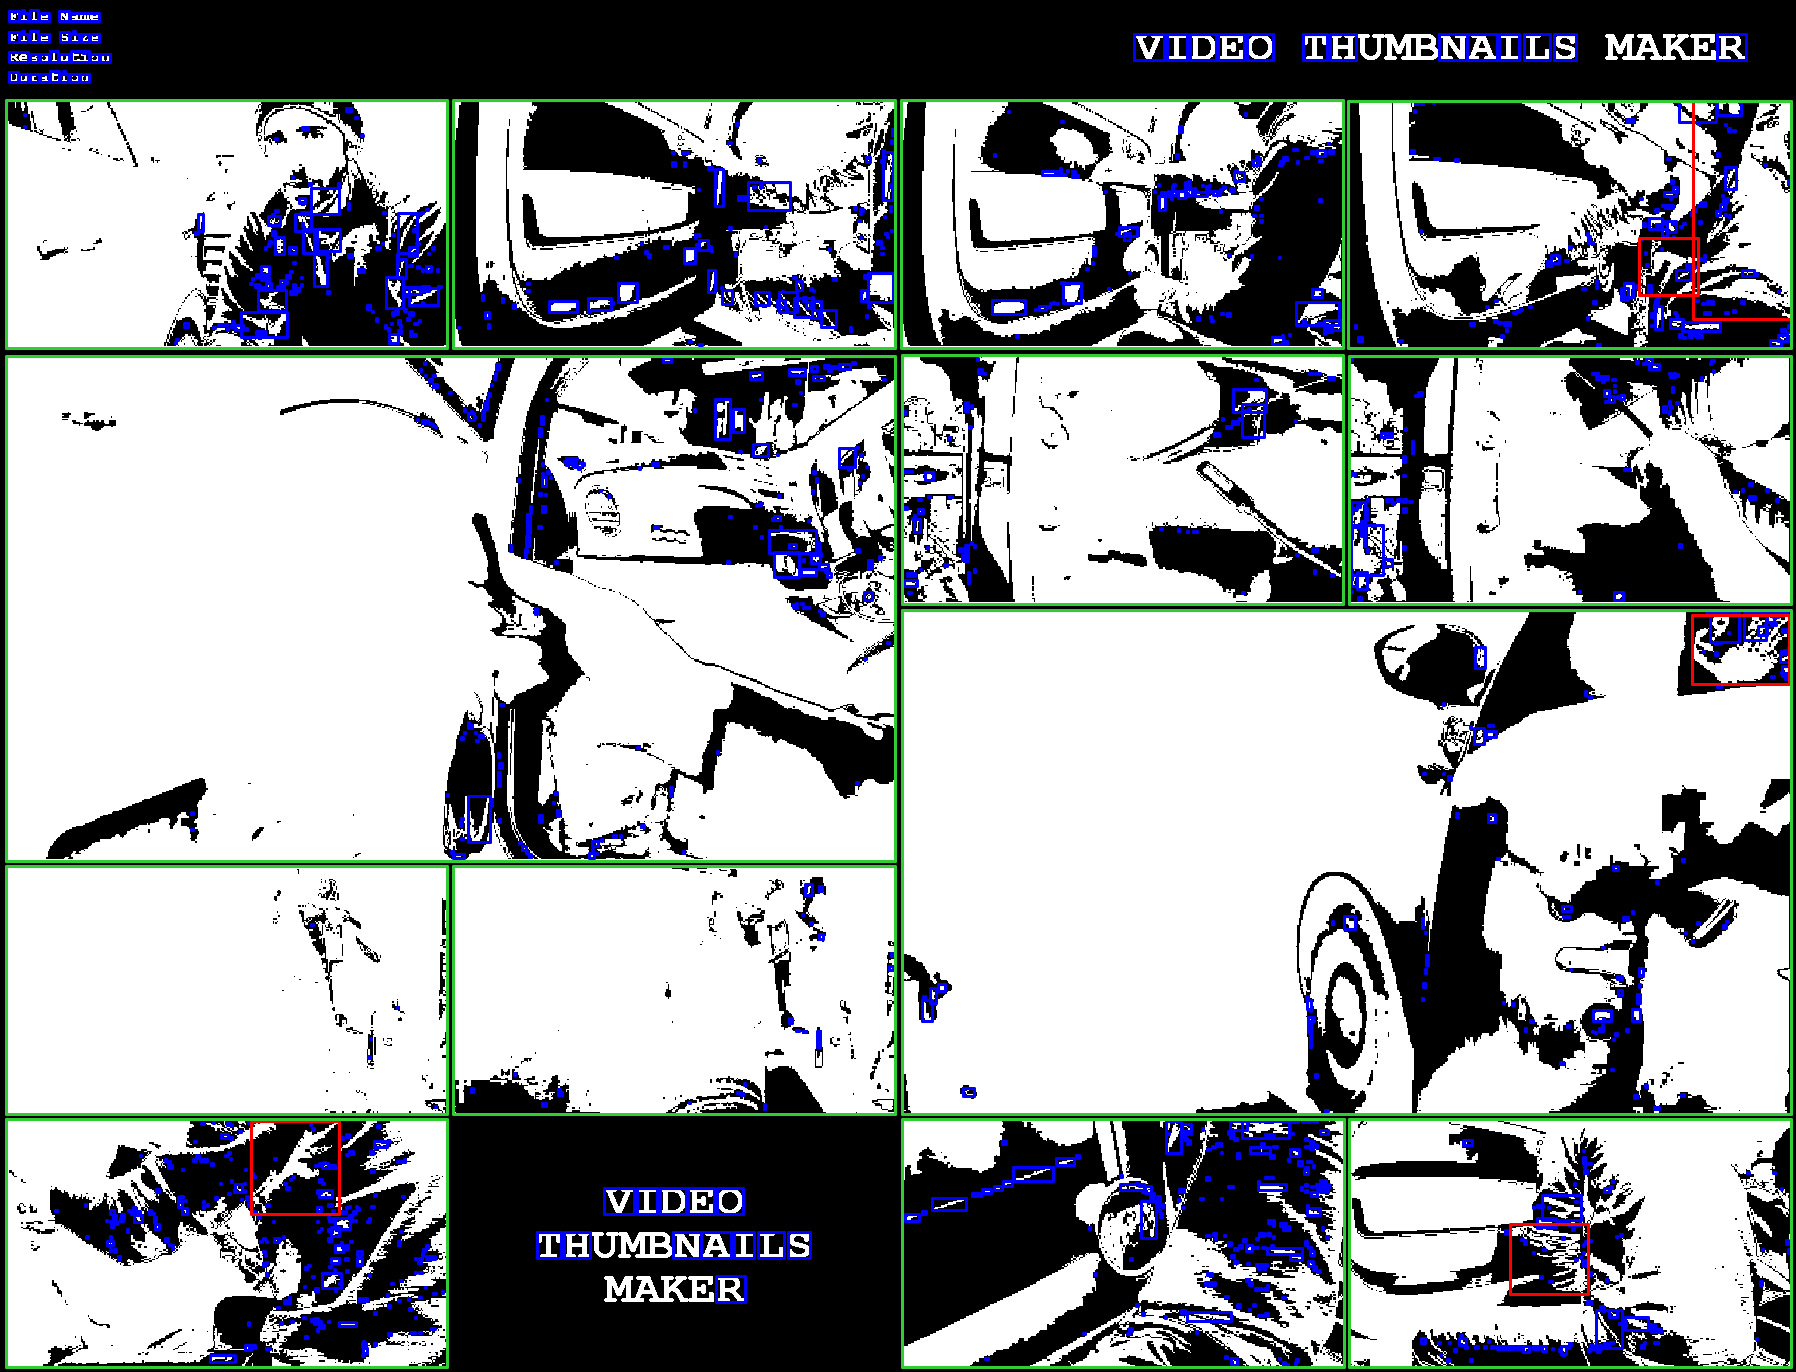 A collage of video stills in a grid pattern that has had a filter applied to aid in image analysis